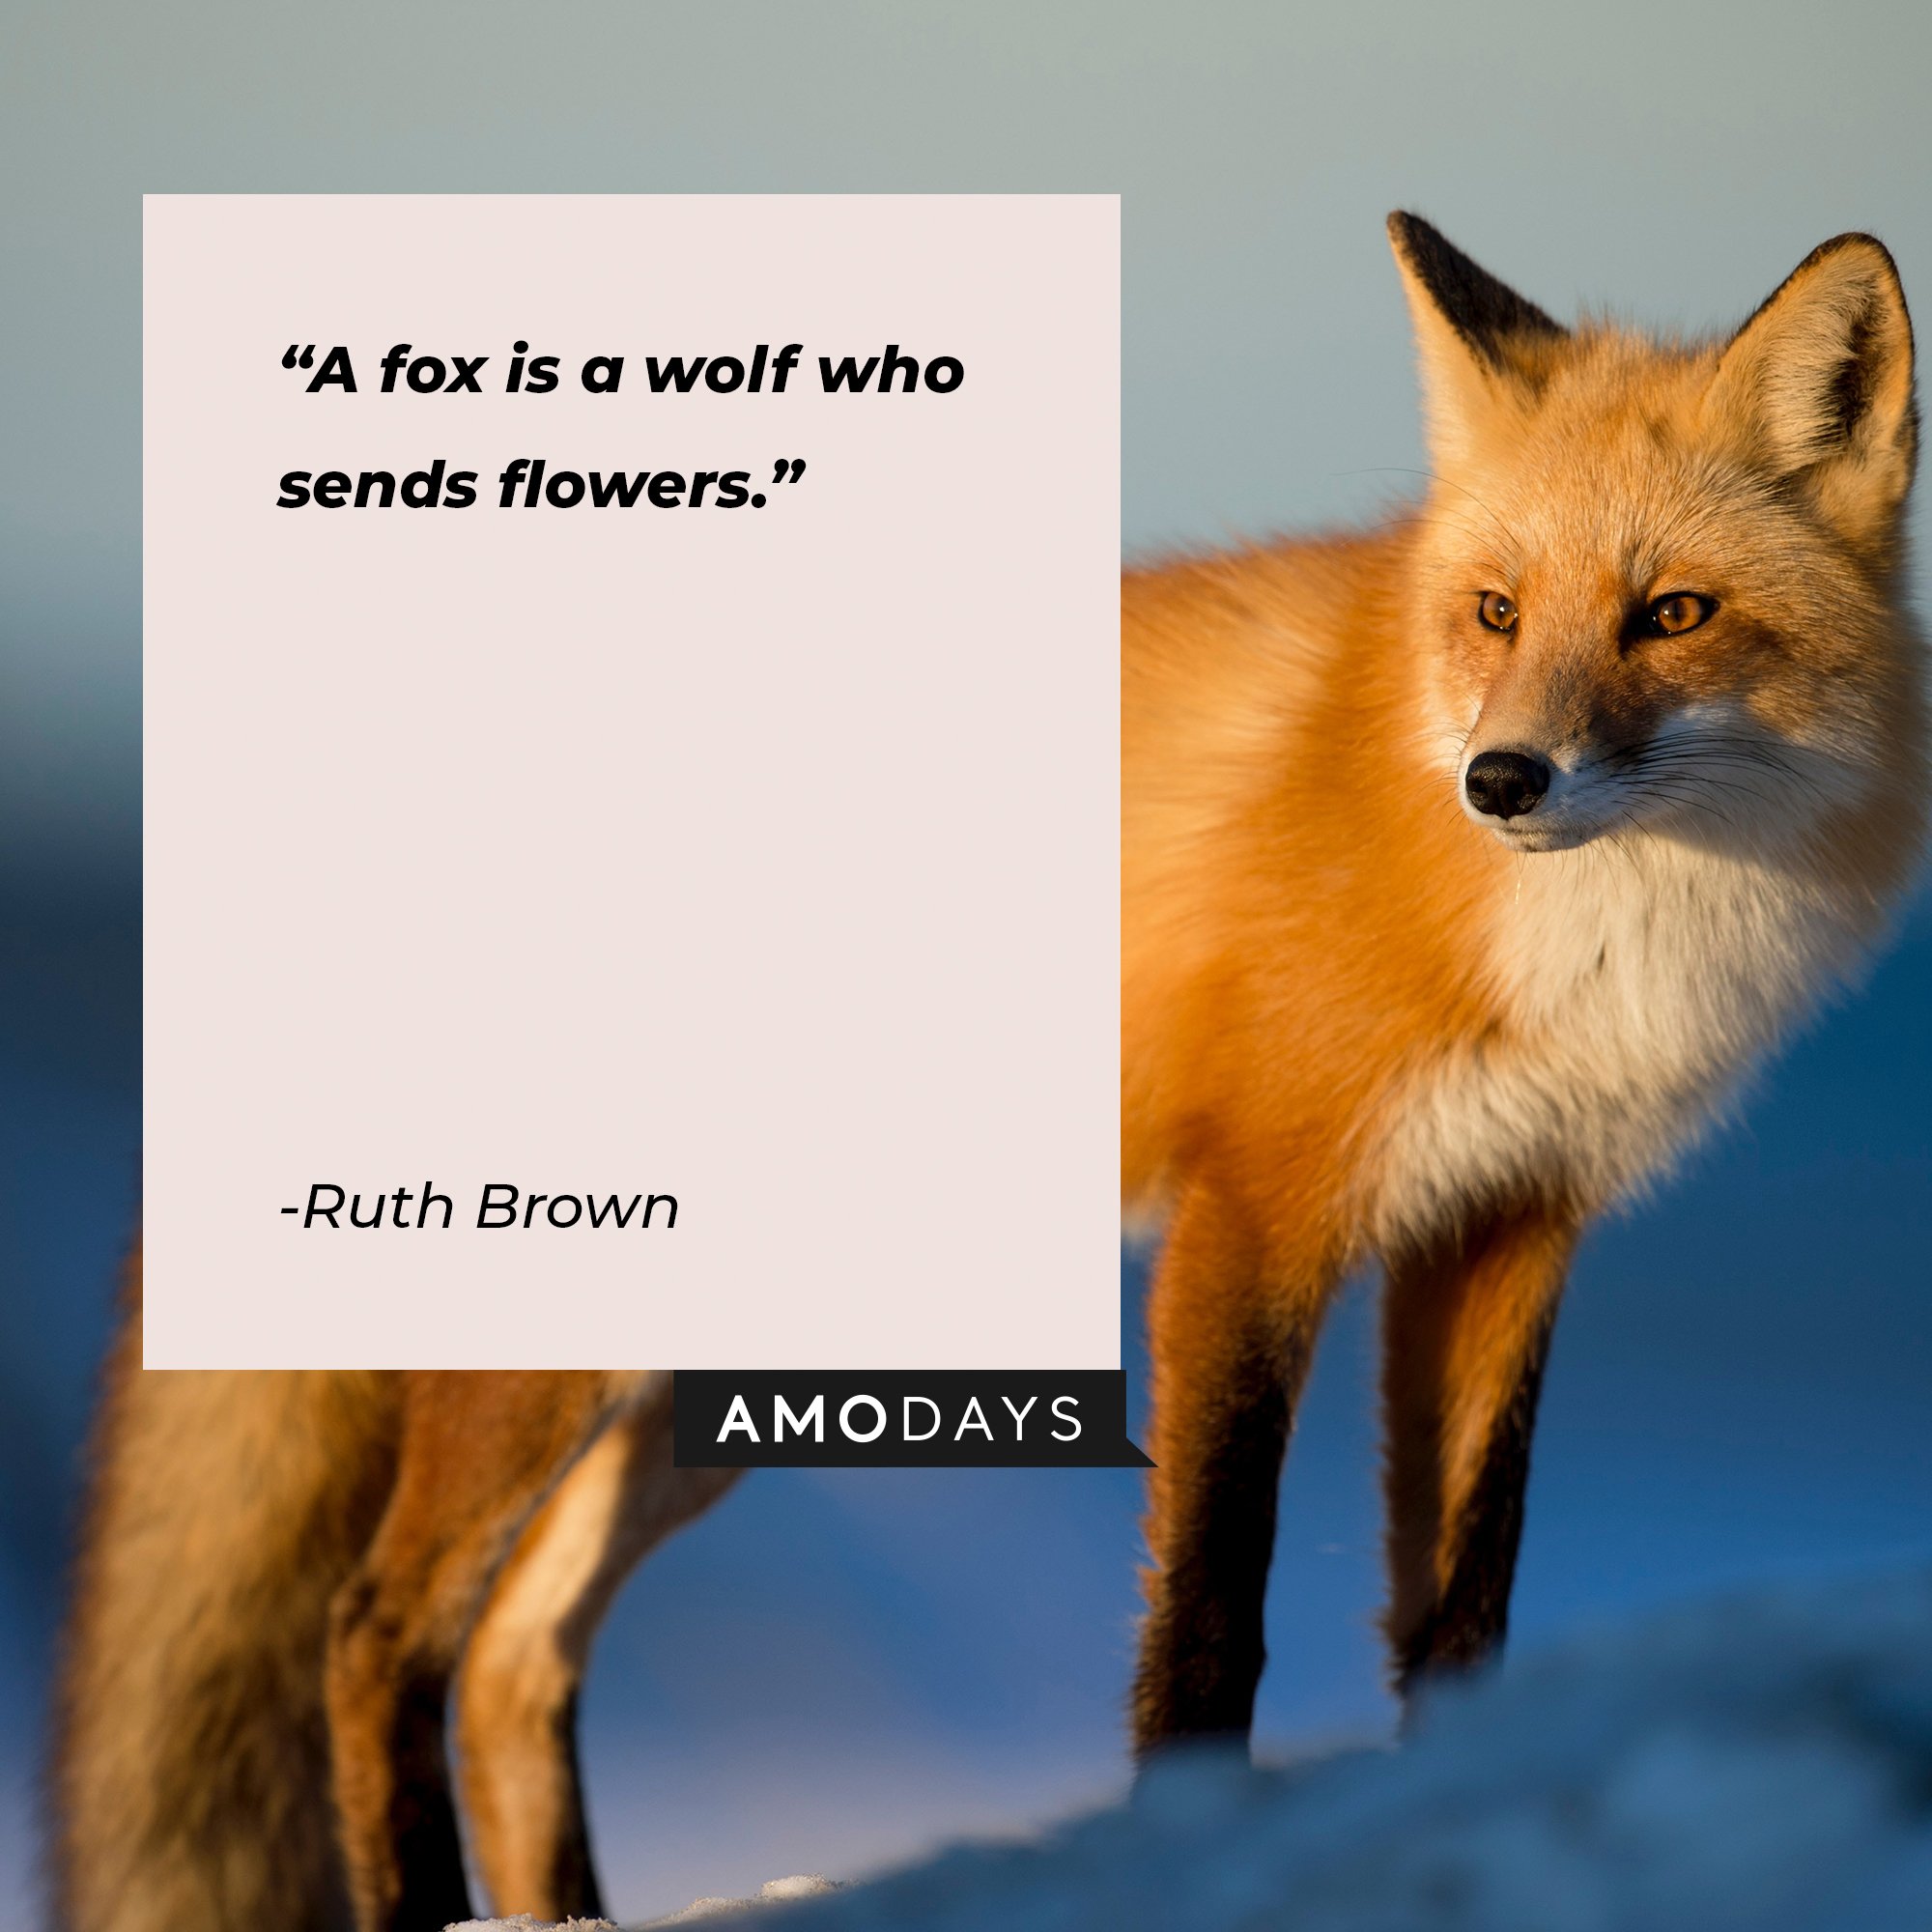 Ruth Brown’s quote: "A fox is a wolf who sends flowers."  |  Image: AmoDays